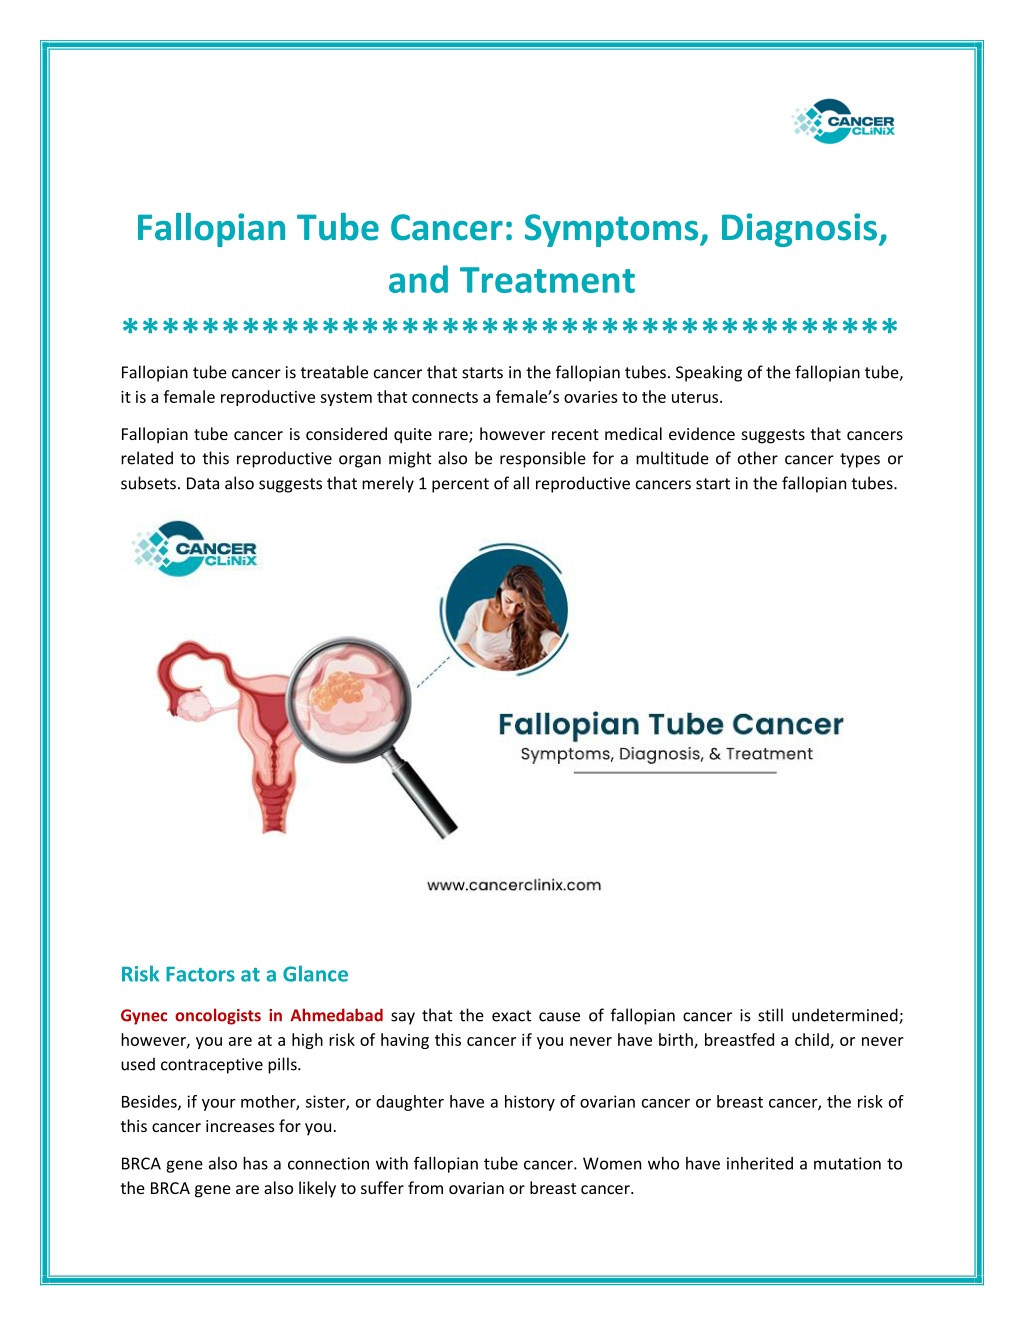 Ppt Fallopian Tube Cancer Symptoms Diagnosis And Treatment Powerpoint Presentation Id